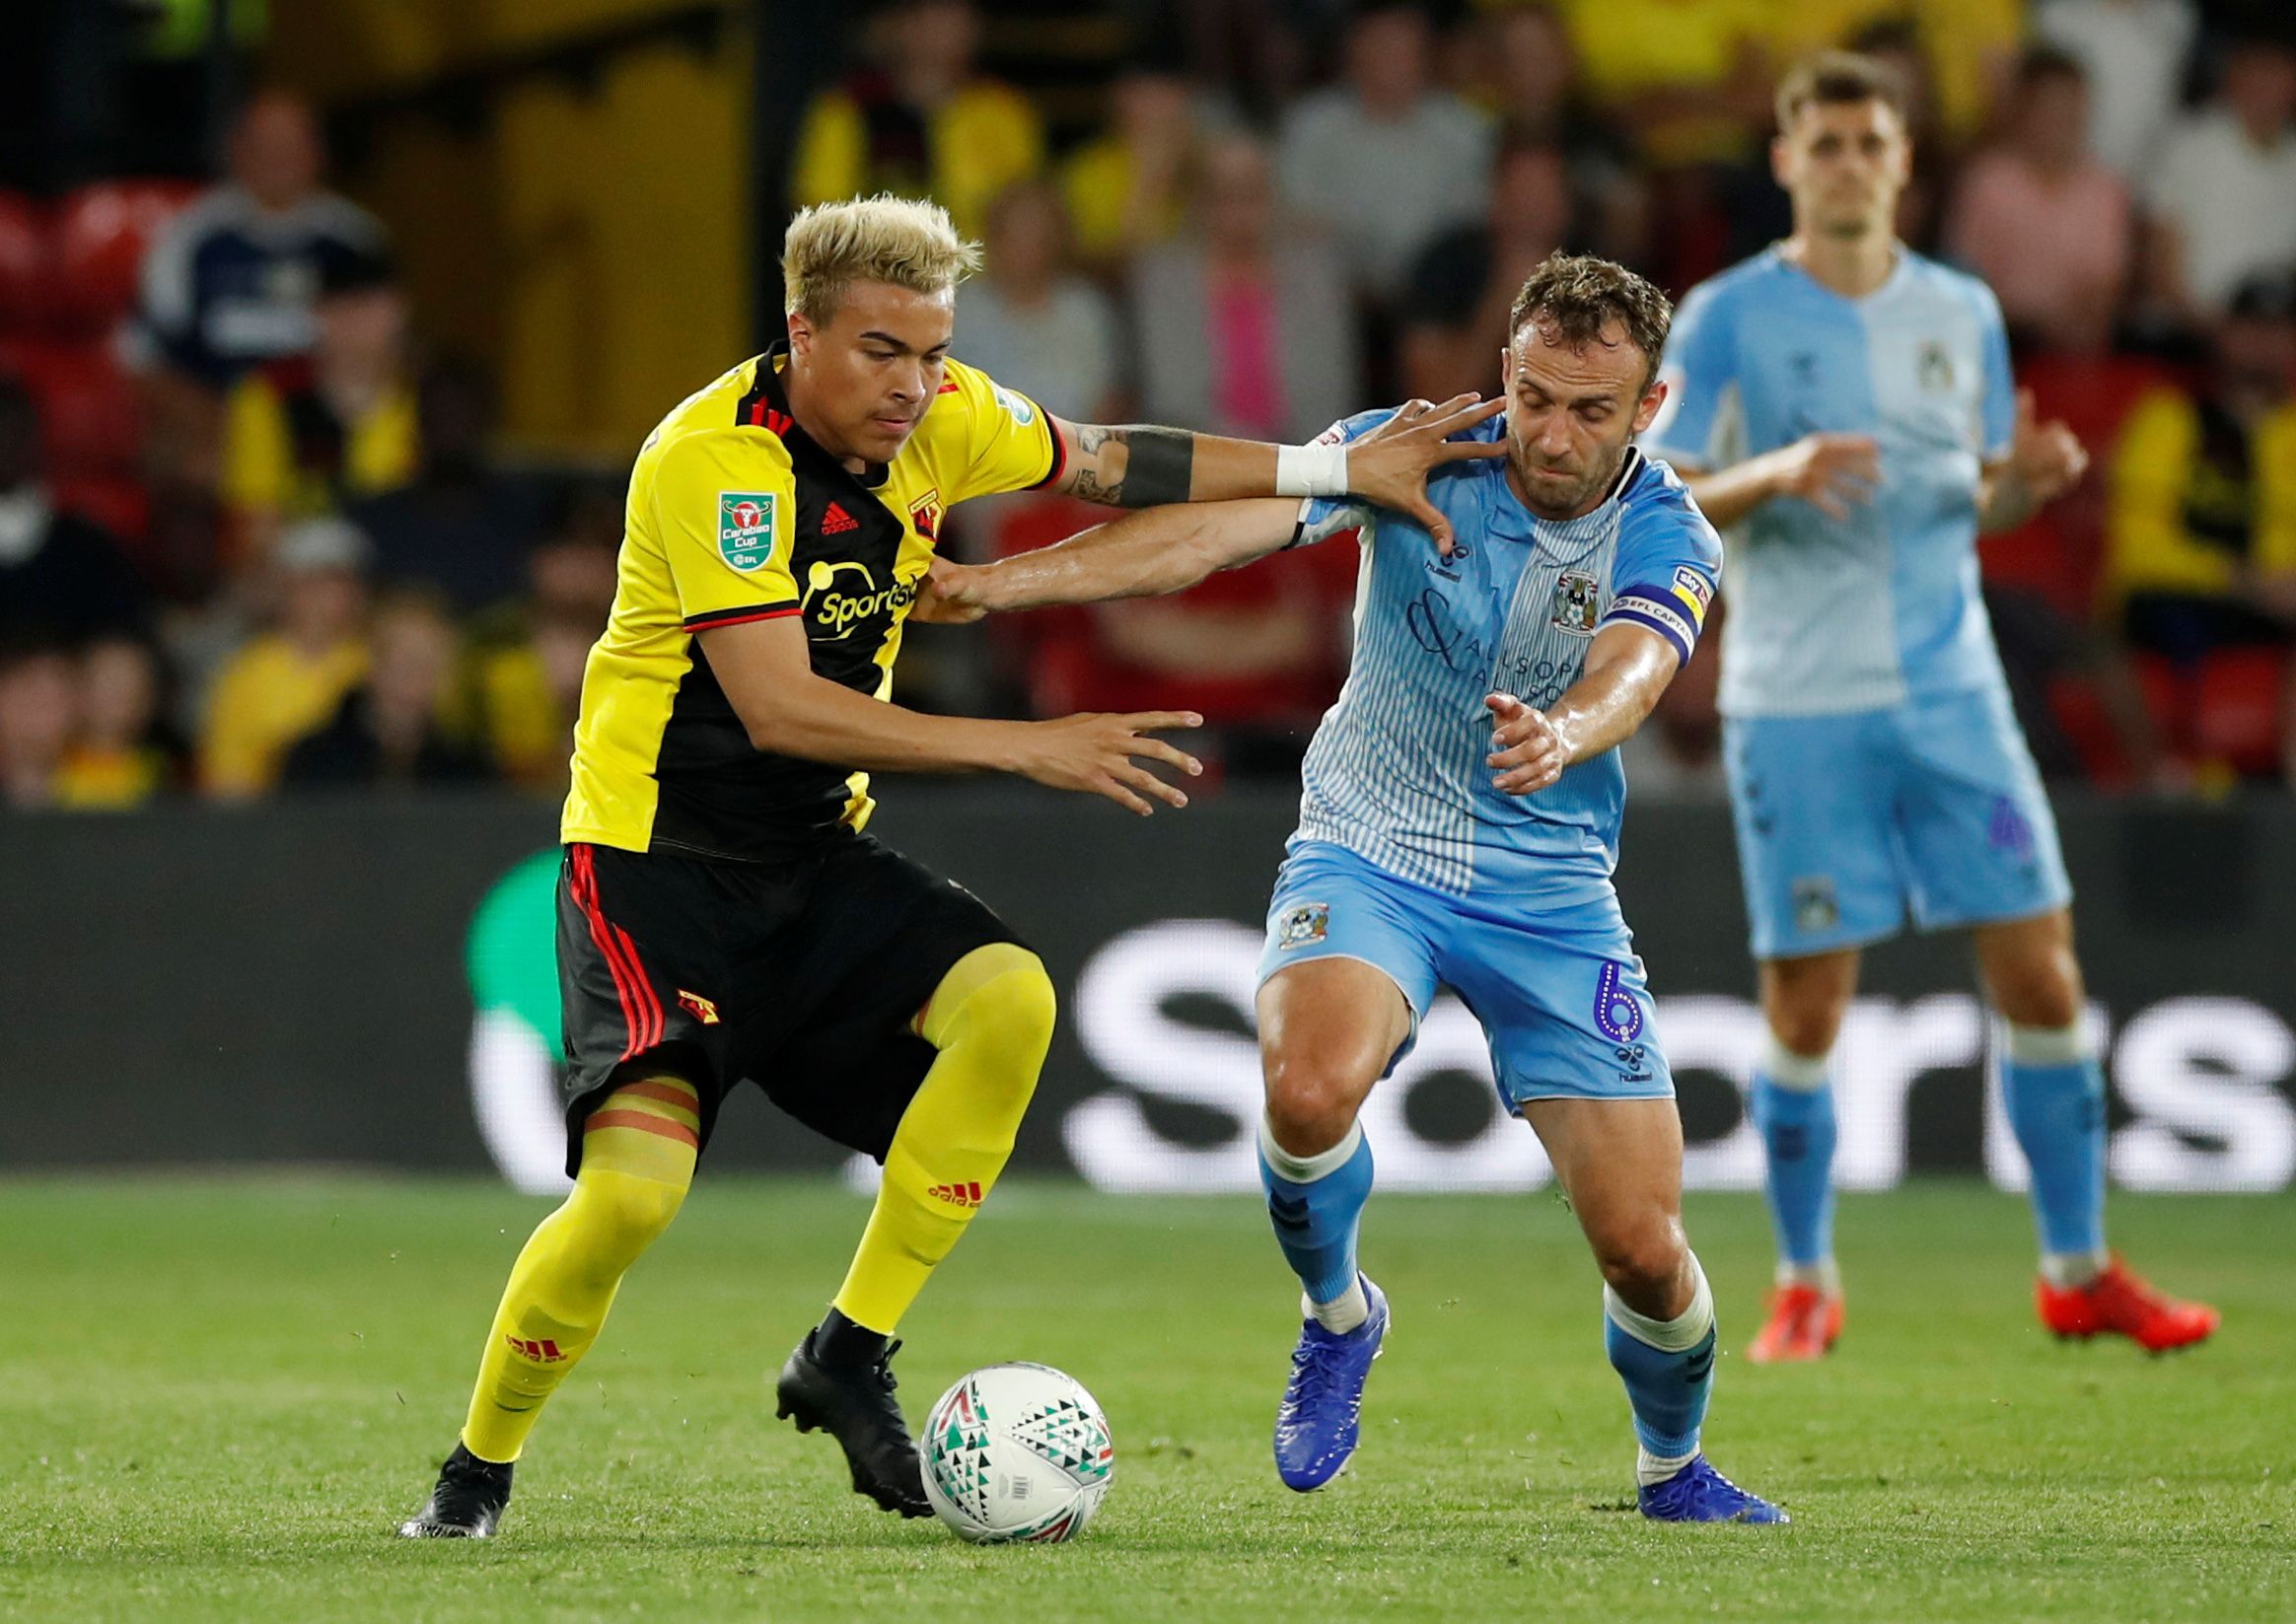 Soccer Football - Carabao Cup Second Round - Watford v Coventry City - Vicarage Road, Watford, Britain - August 27, 2019  Coventry City's Liam Kelly in action with Watford's Adalberto Penaranda   Action Images via Reuters/Paul Childs  EDITORIAL USE ONLY. No use with unauthorized audio, video, data, fixture lists, club/league logos or 